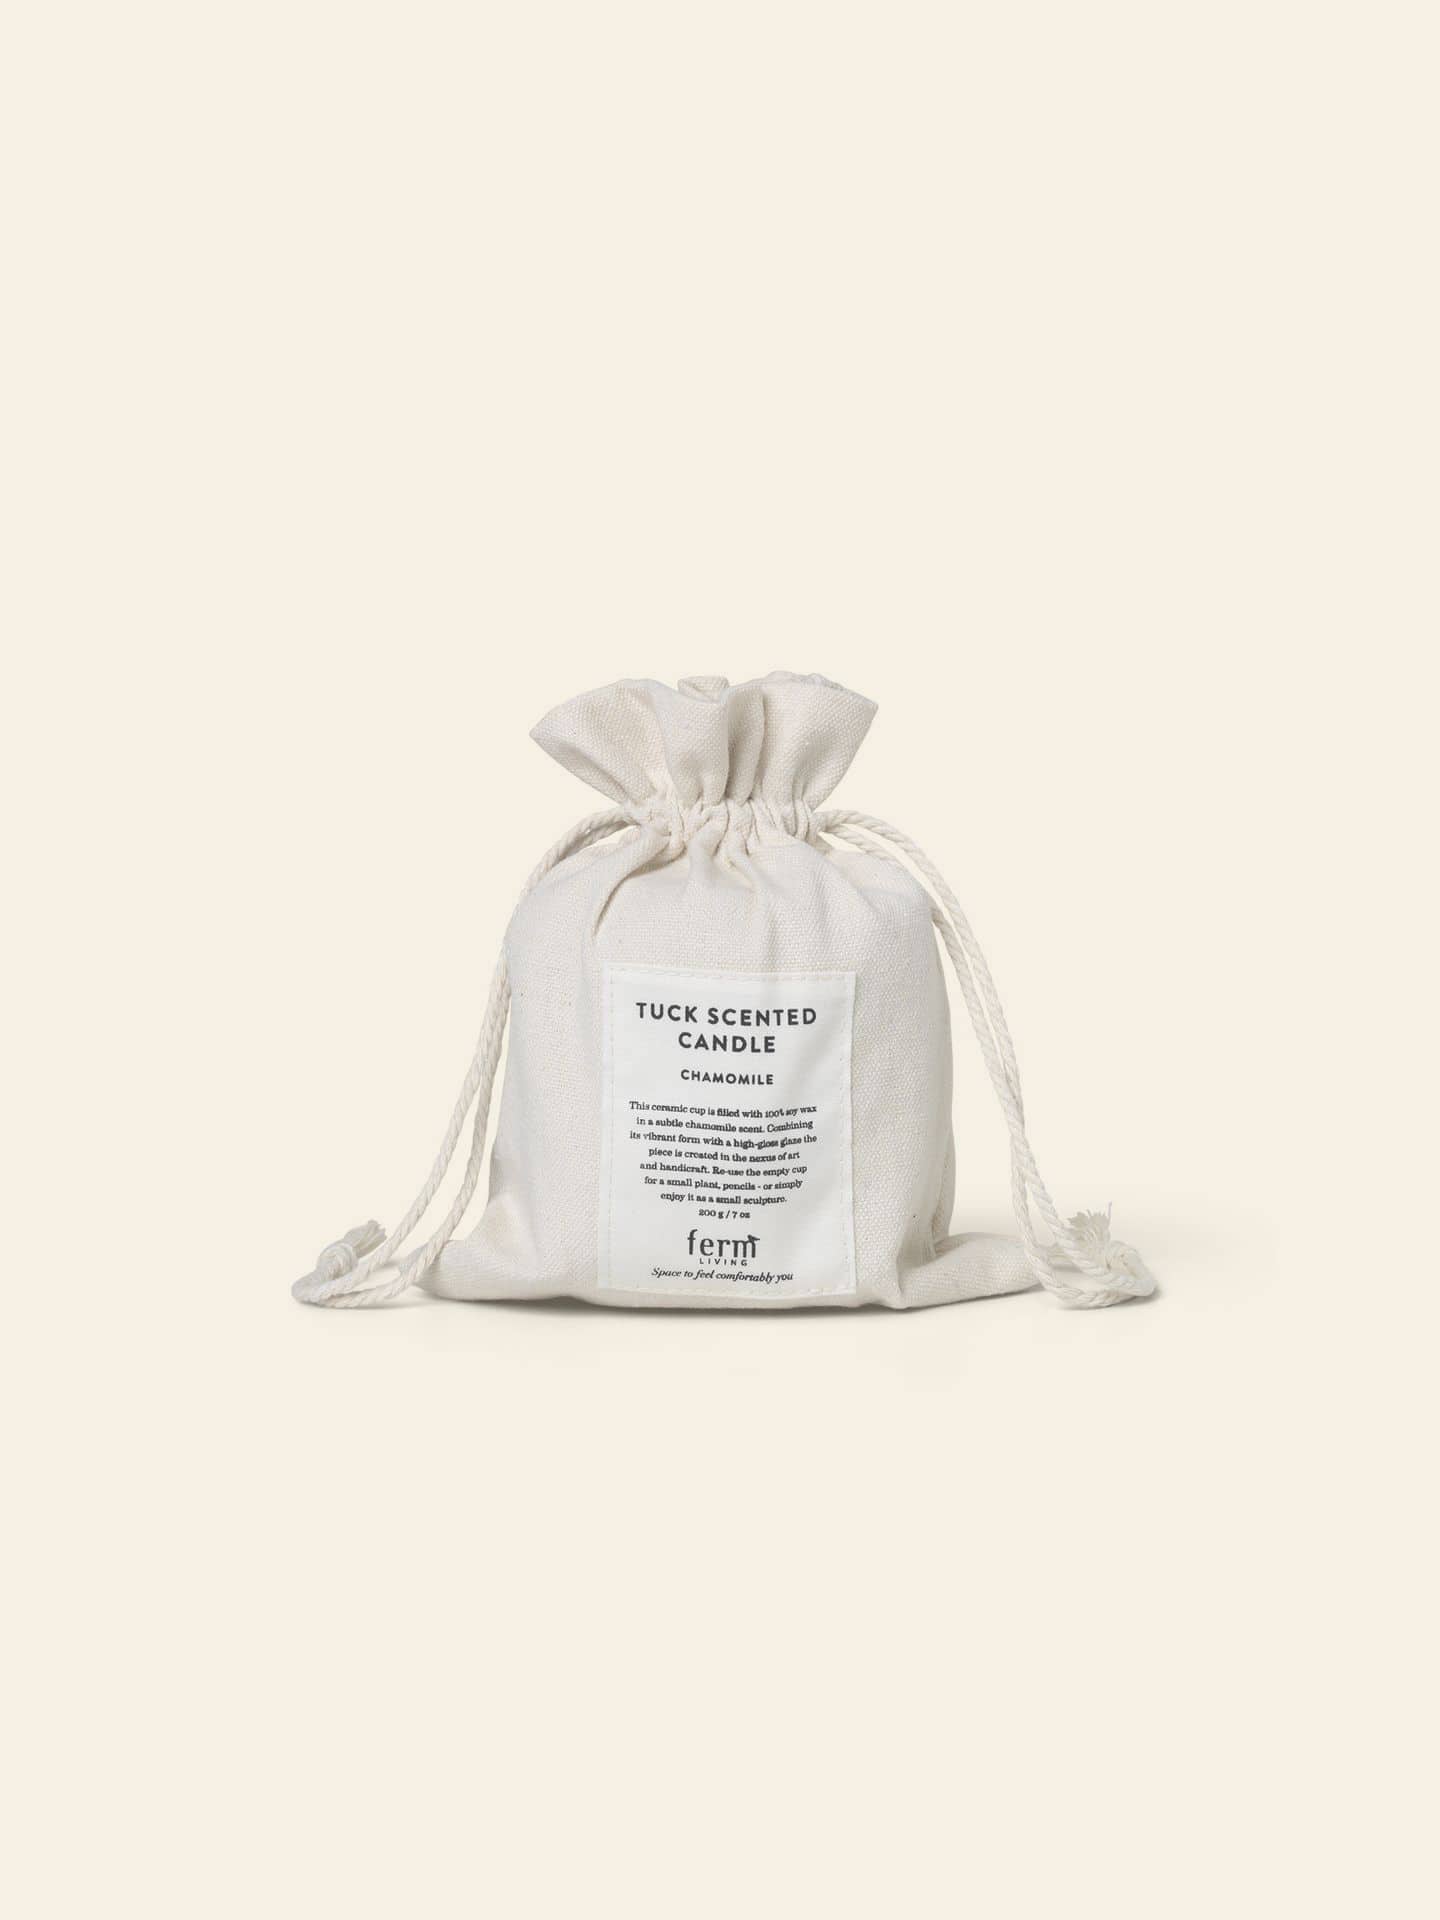 ferm Living Tuck Scented Candle Cashmere 2